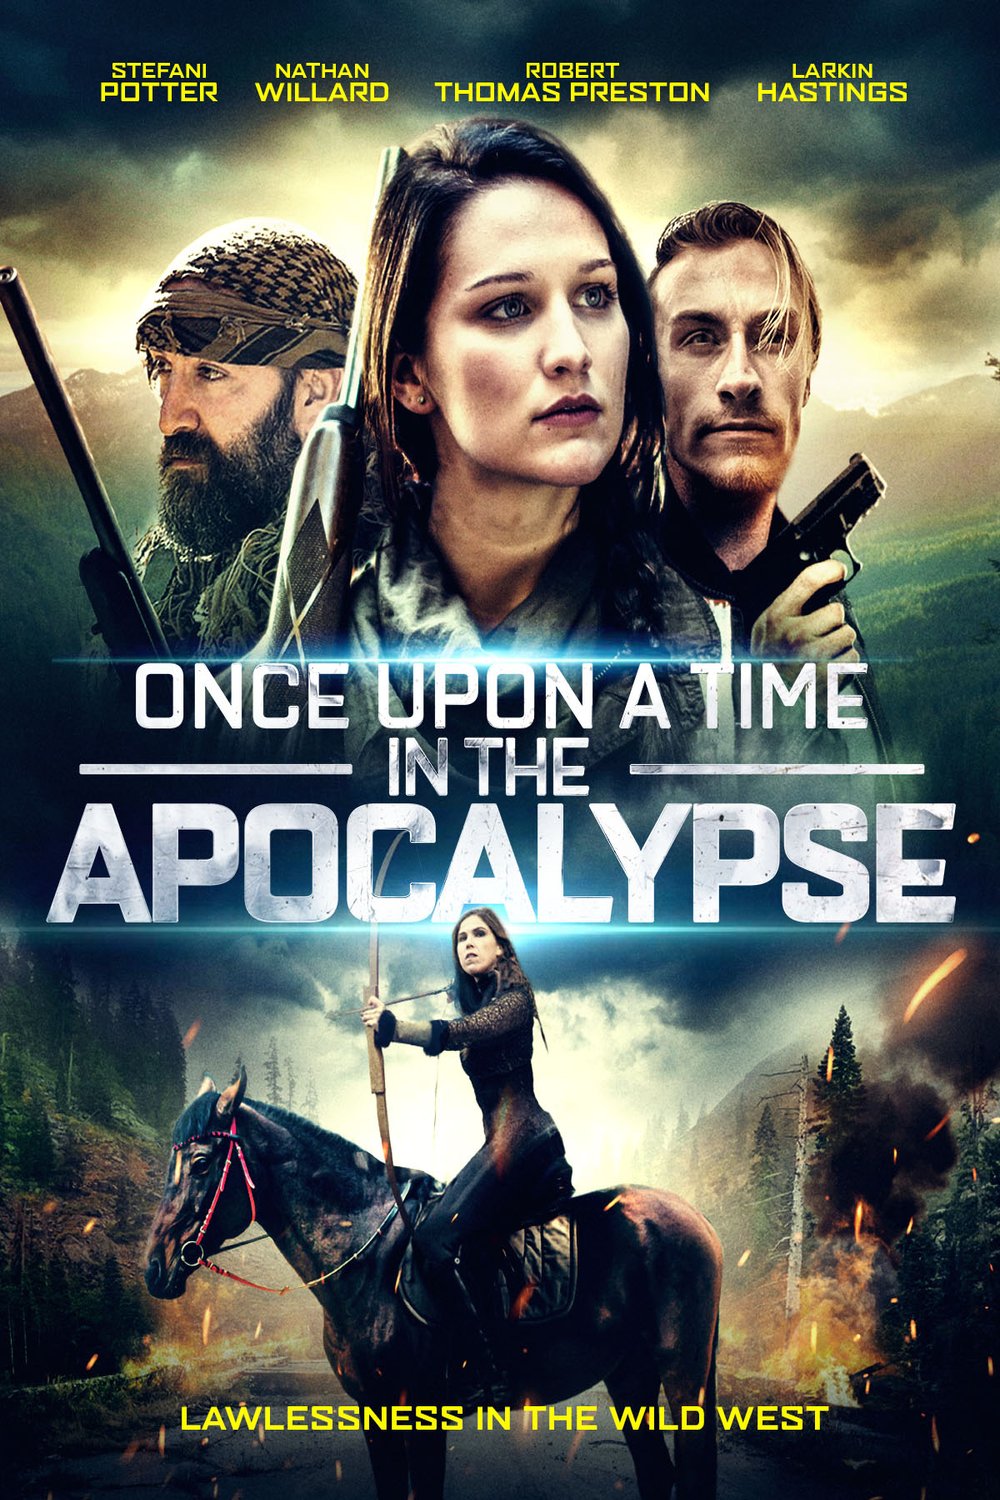 Poster of the movie Once Upon a Time in the Apocalypse